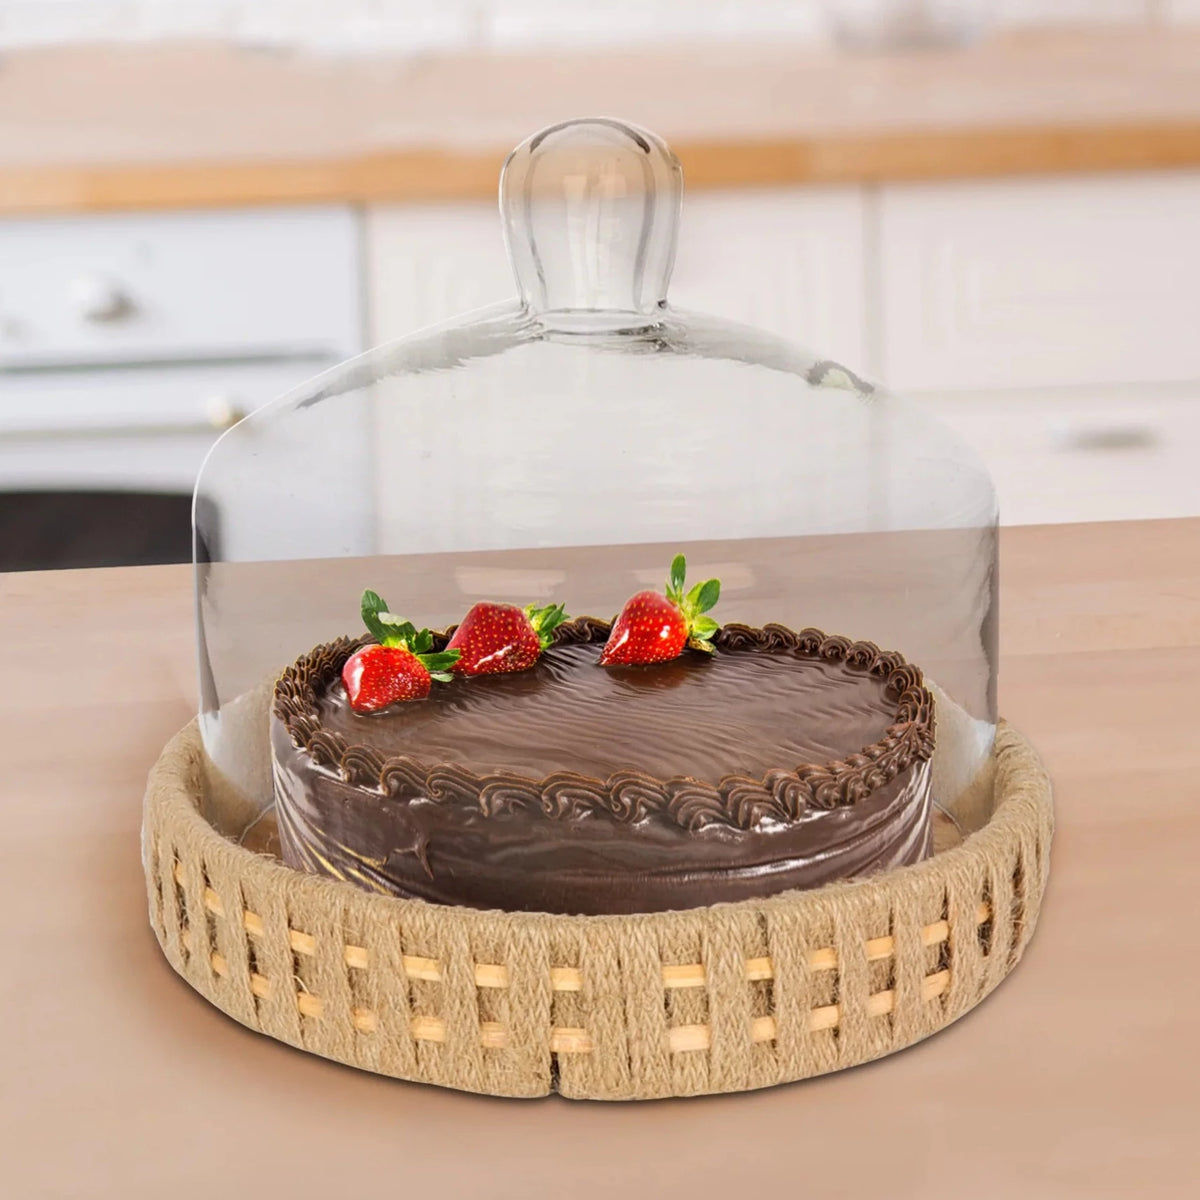 Rustic Wood Cake Stand with Cloche - 6.75 IN JT